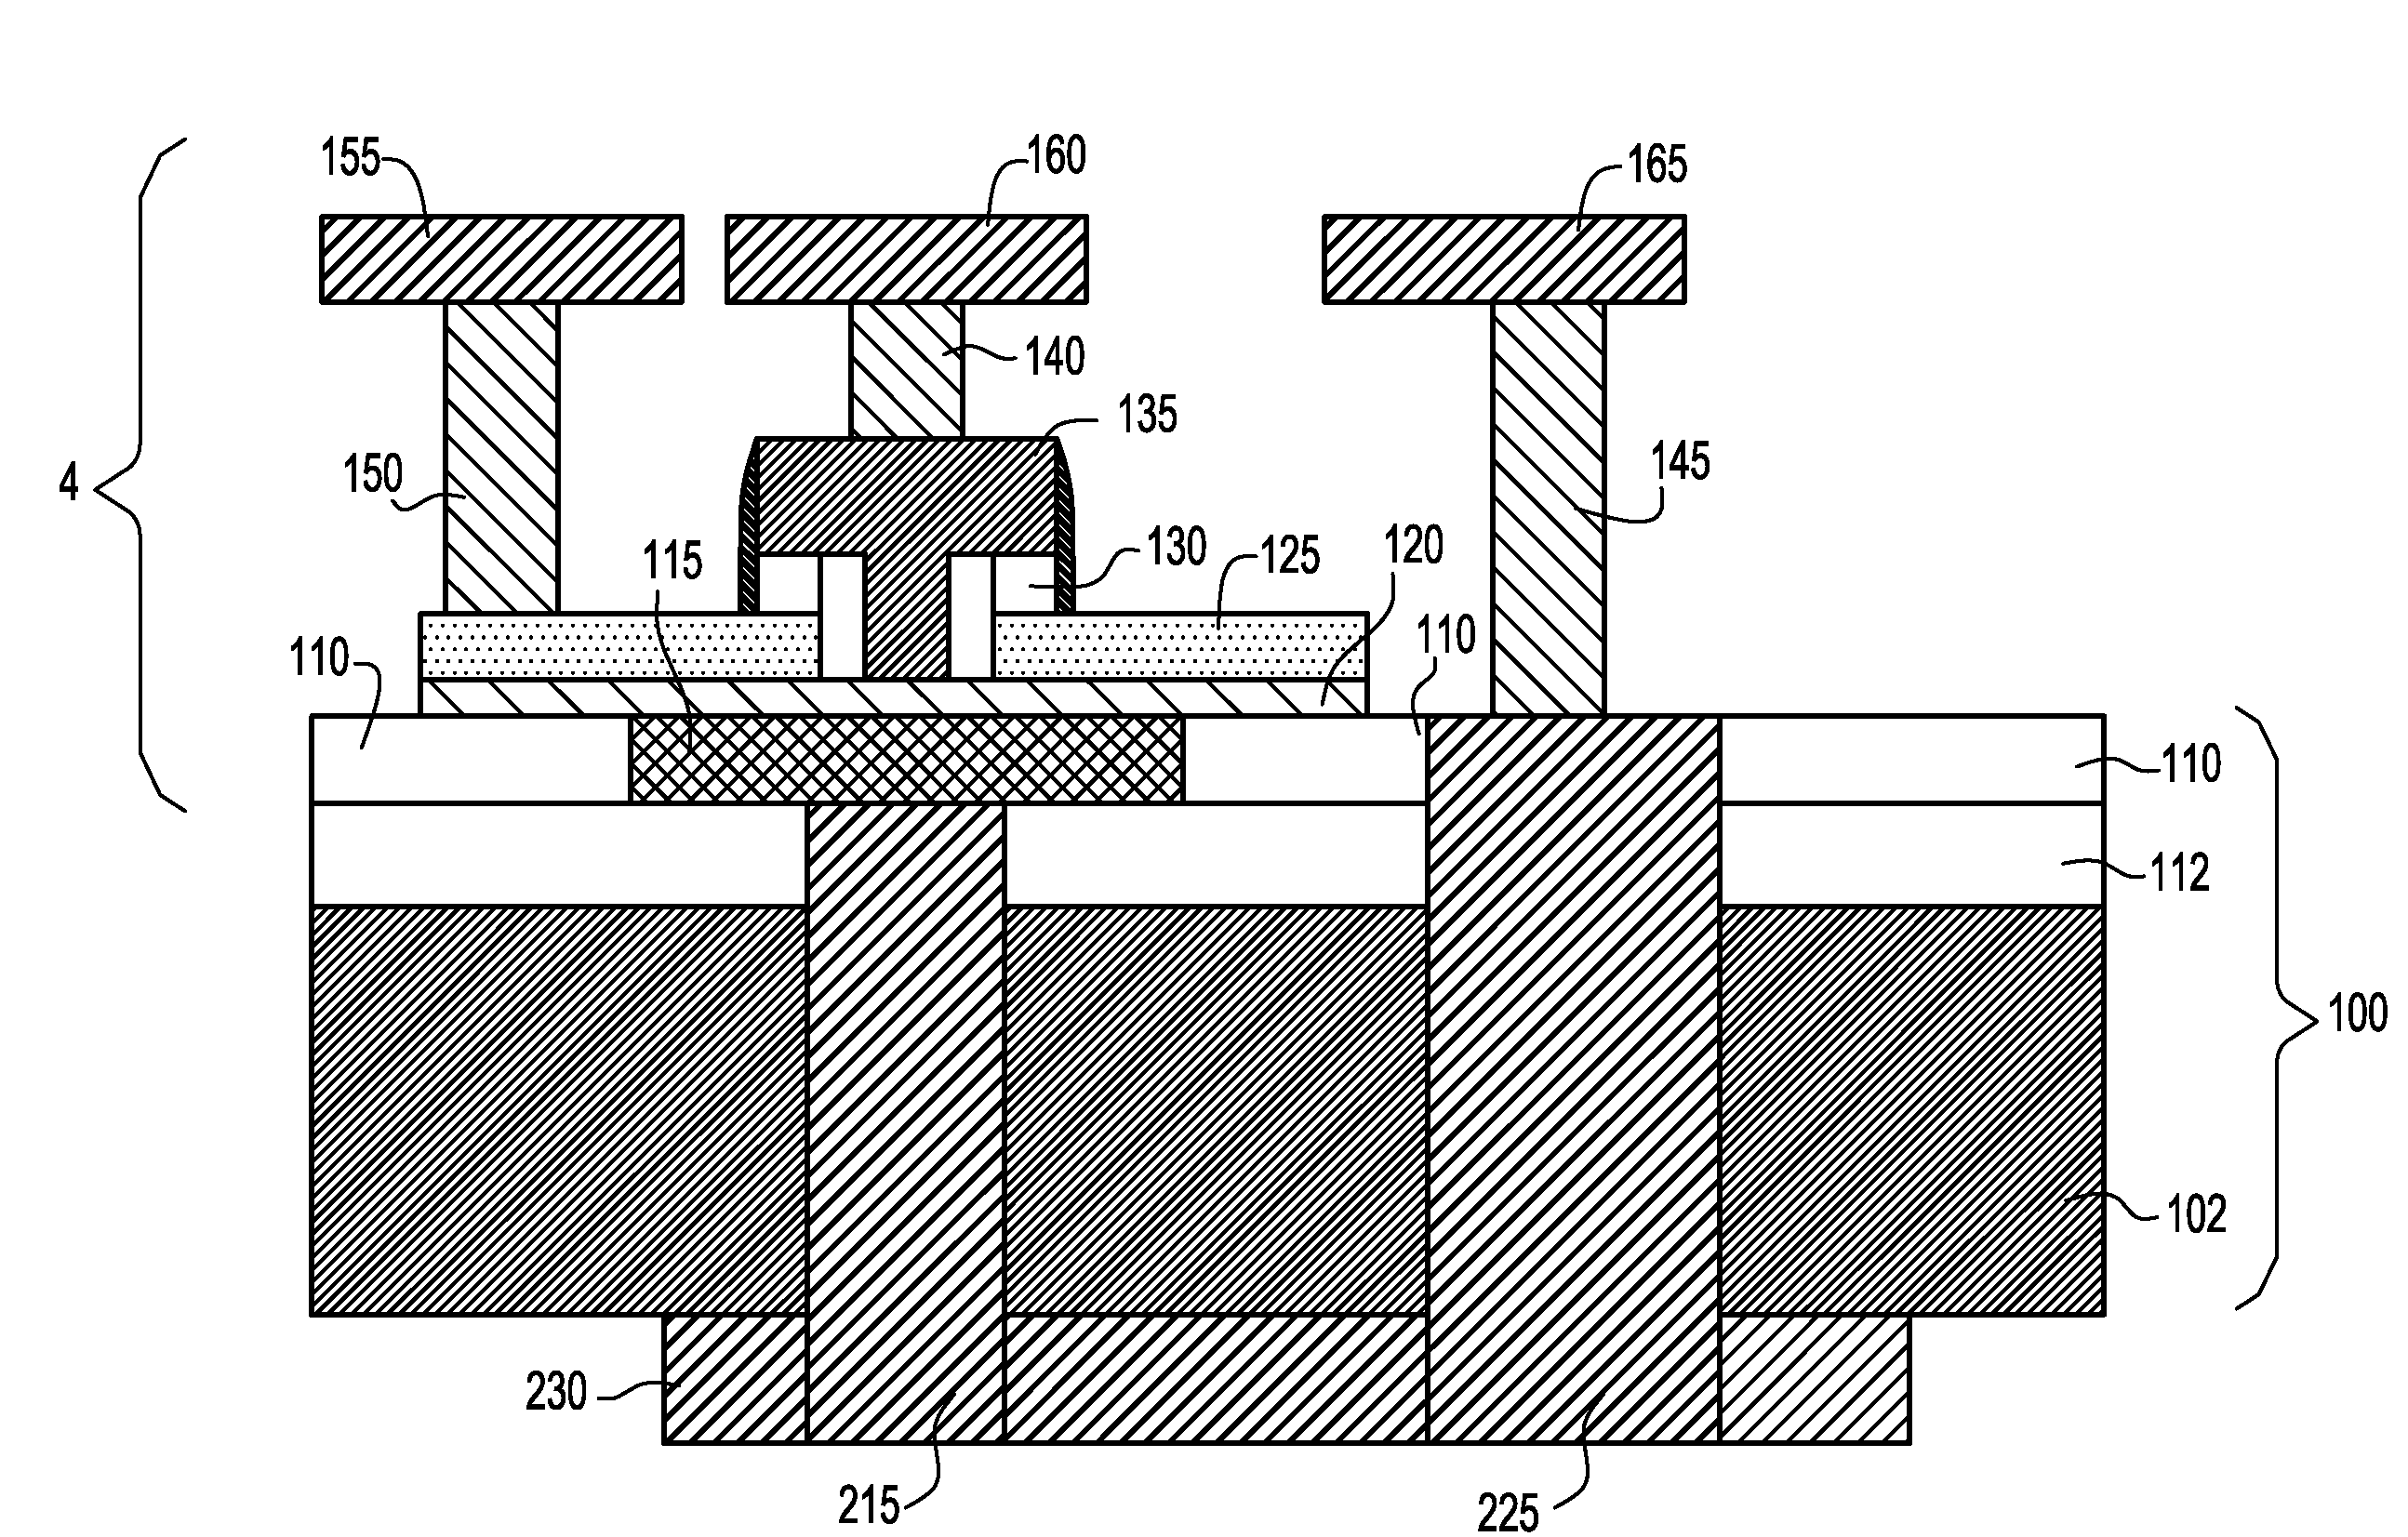 Semiconductor device structures with backside contacts for improved heat dissipation and reduced parasitic resistance